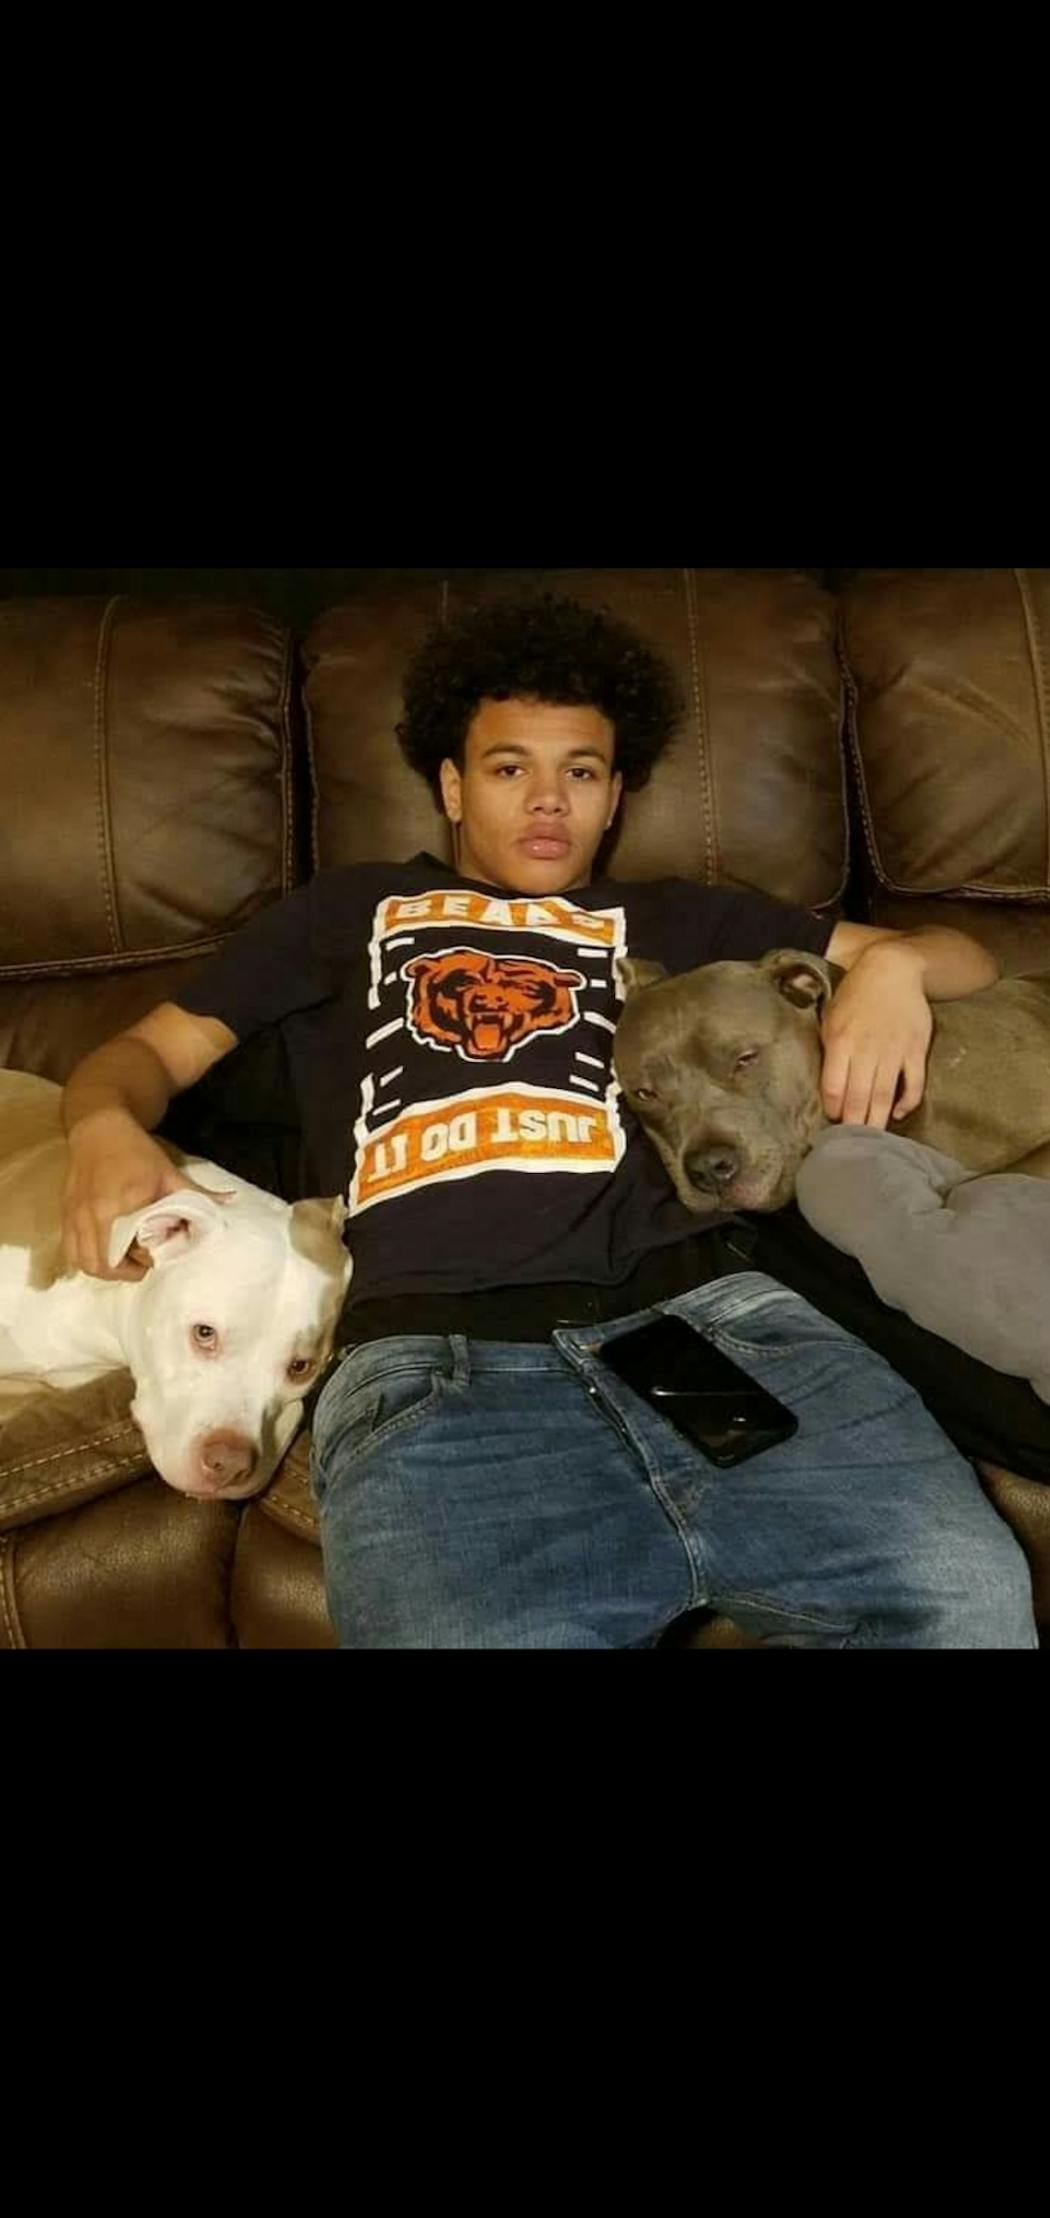 Caleb Livingston with his dogs, Ciroc and Rocko, before he was shot in the head in May 2019.